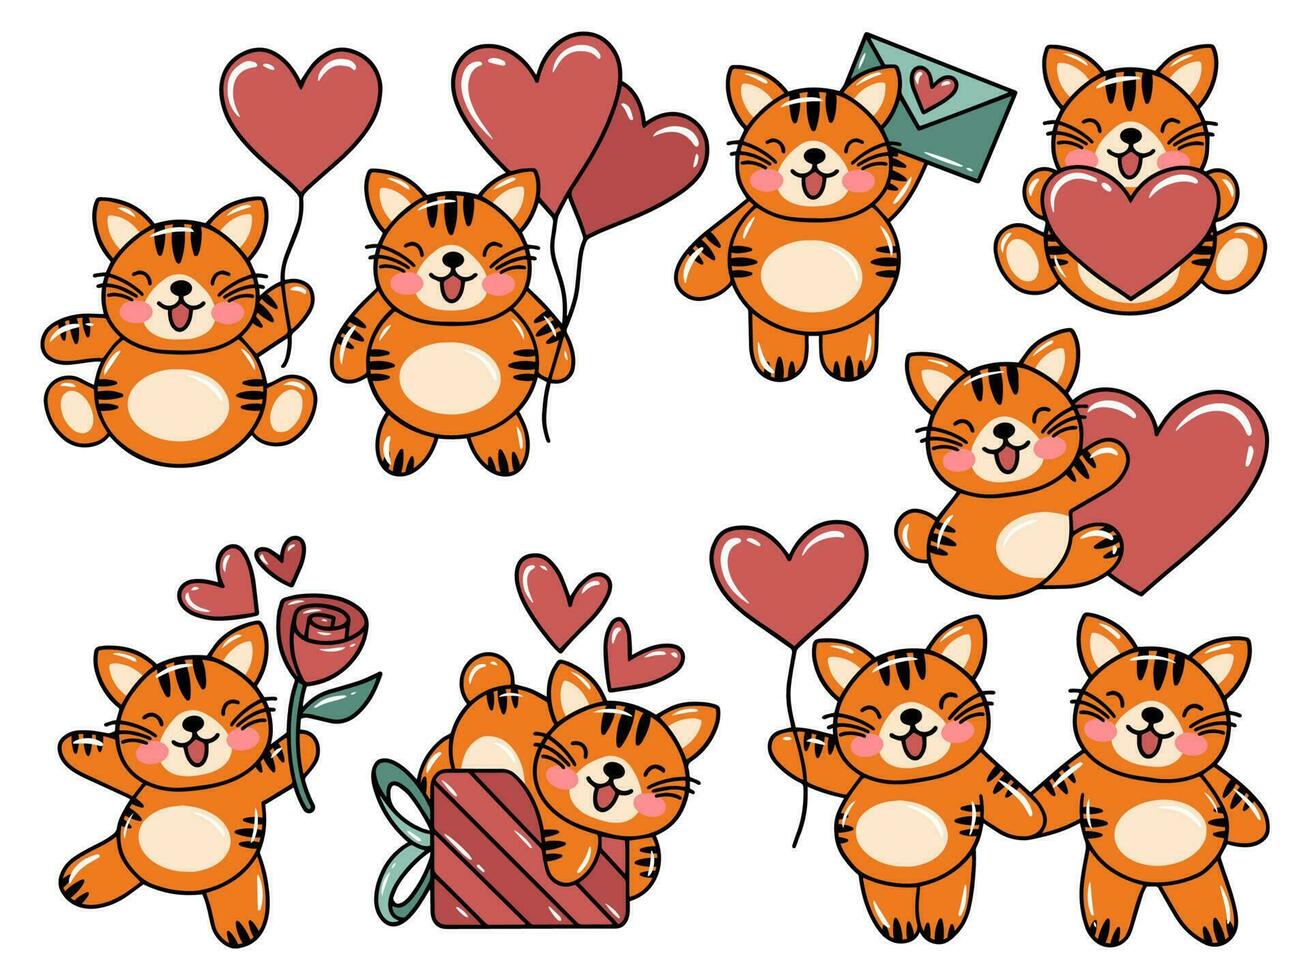 Tiger Cartoon Cute for Valentines Day vector